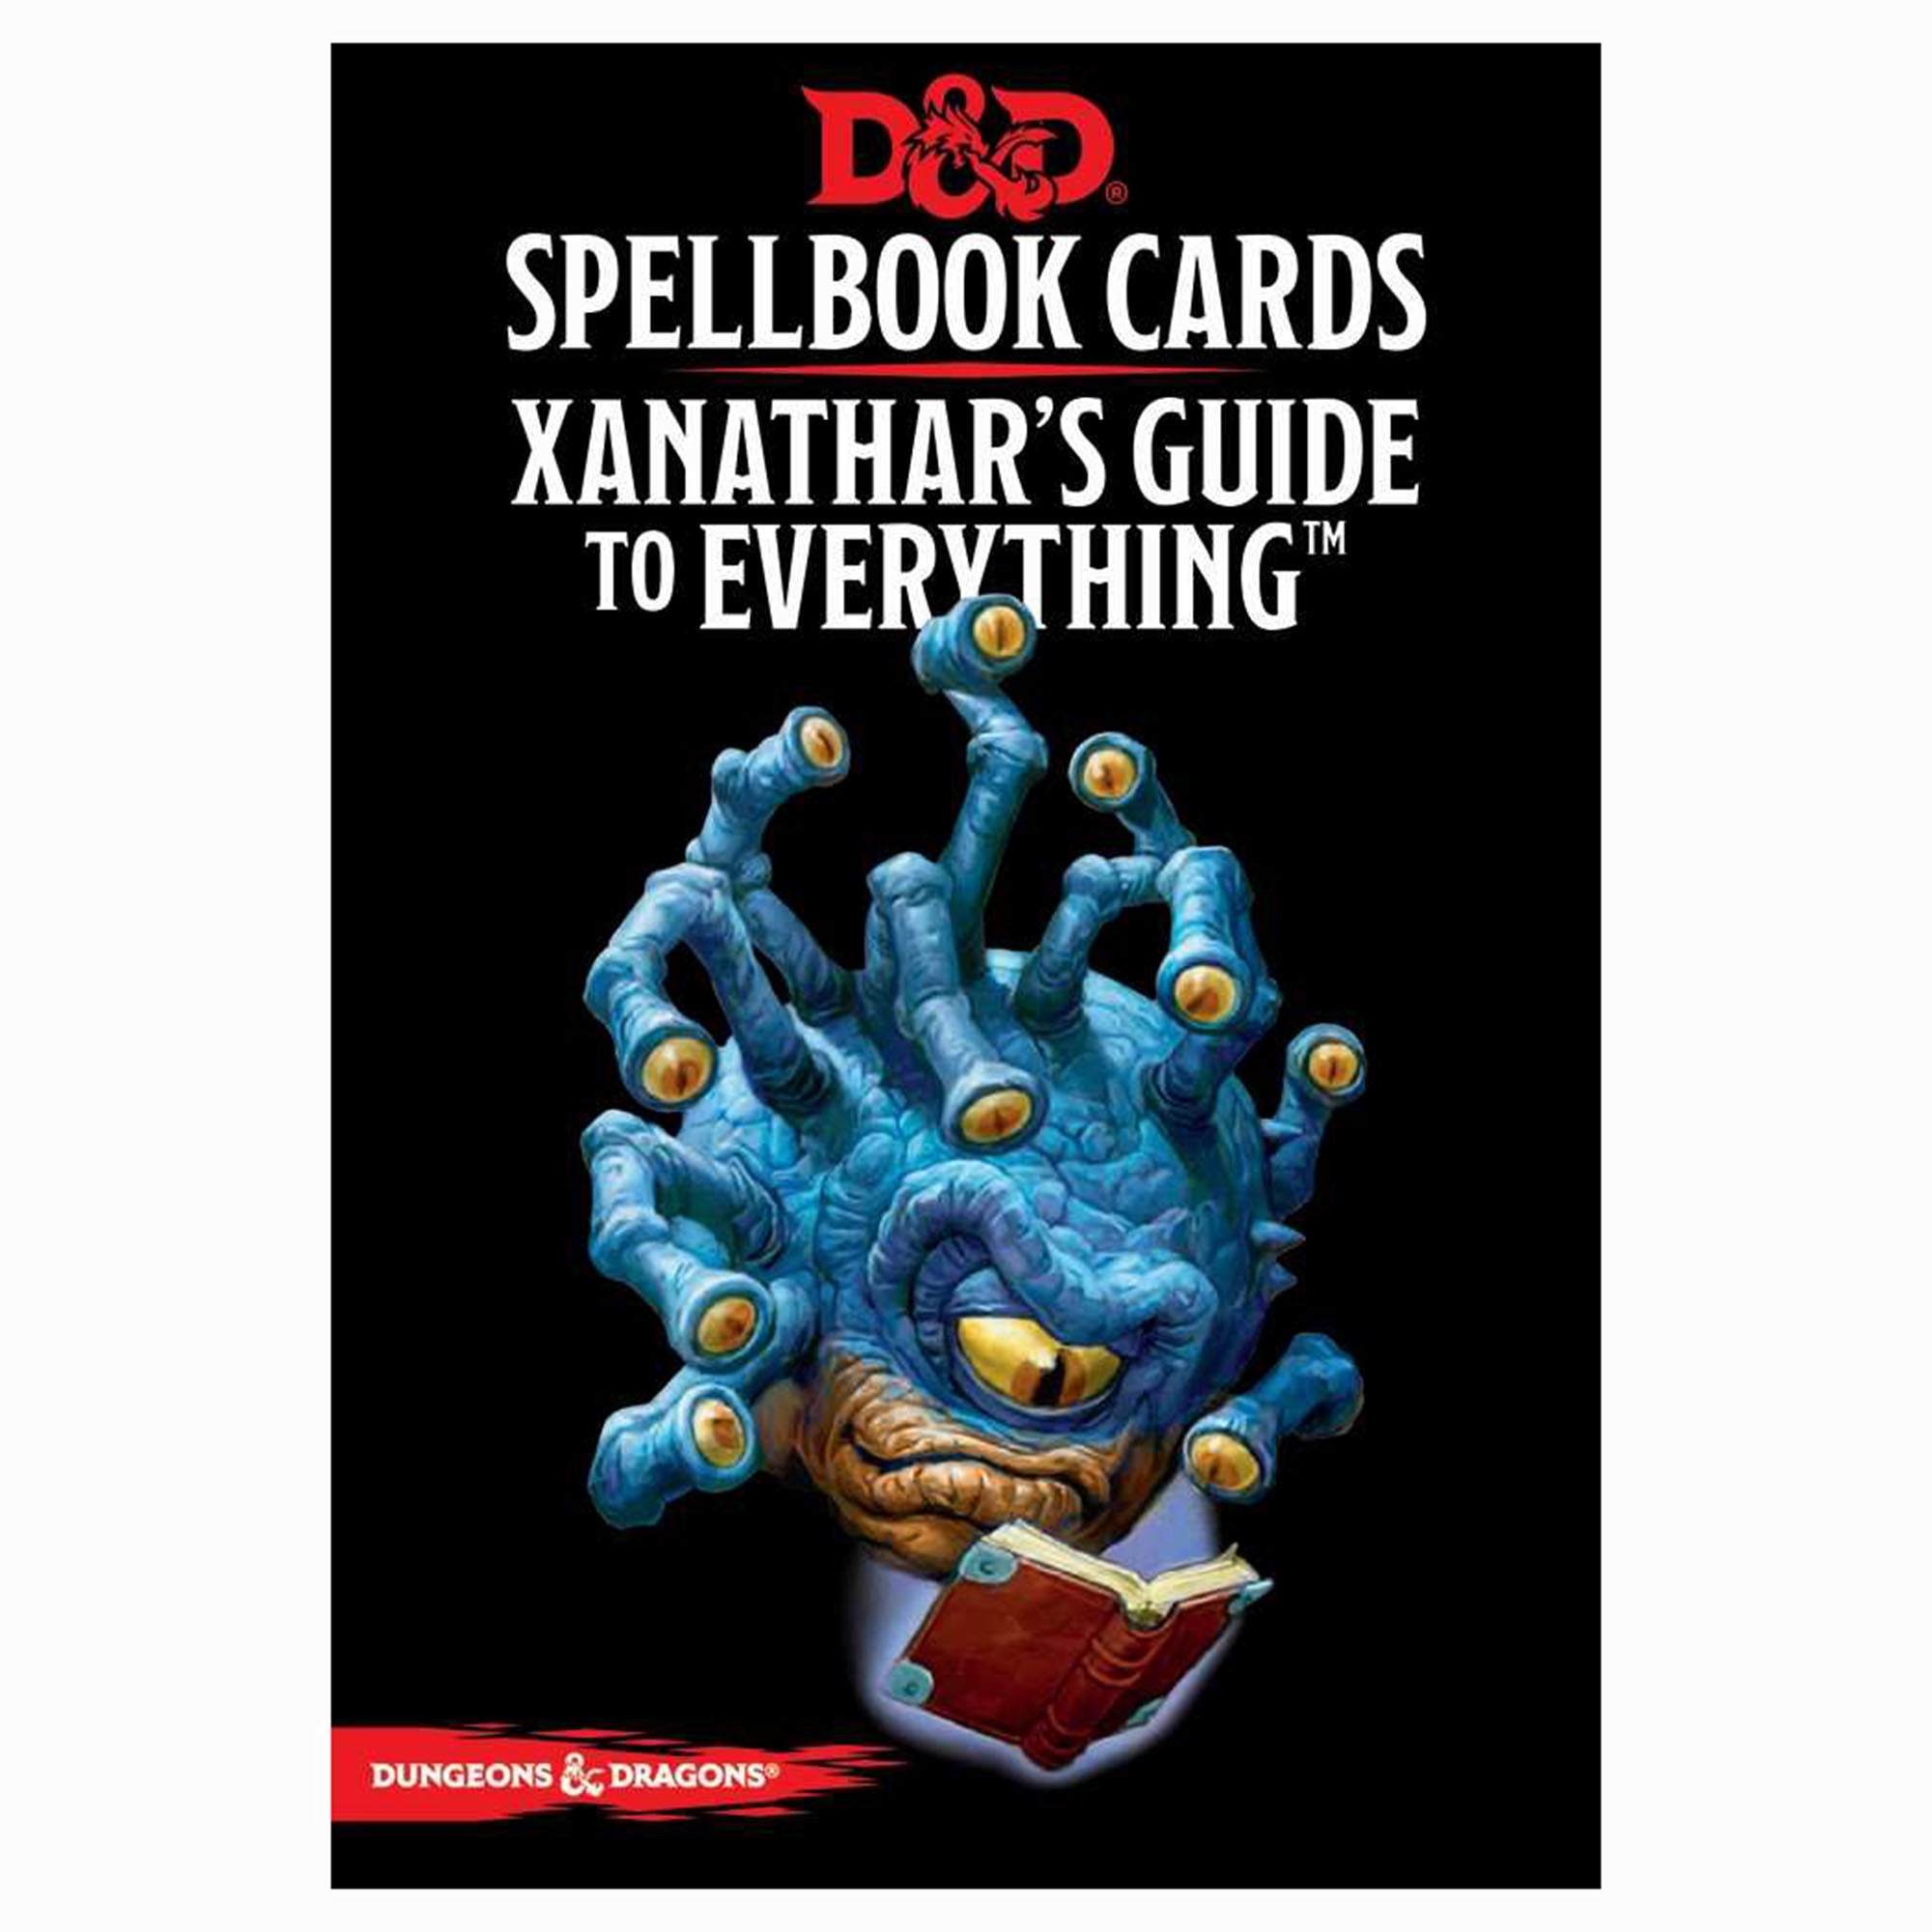 dnd xanathar's guide to everything spellbook card